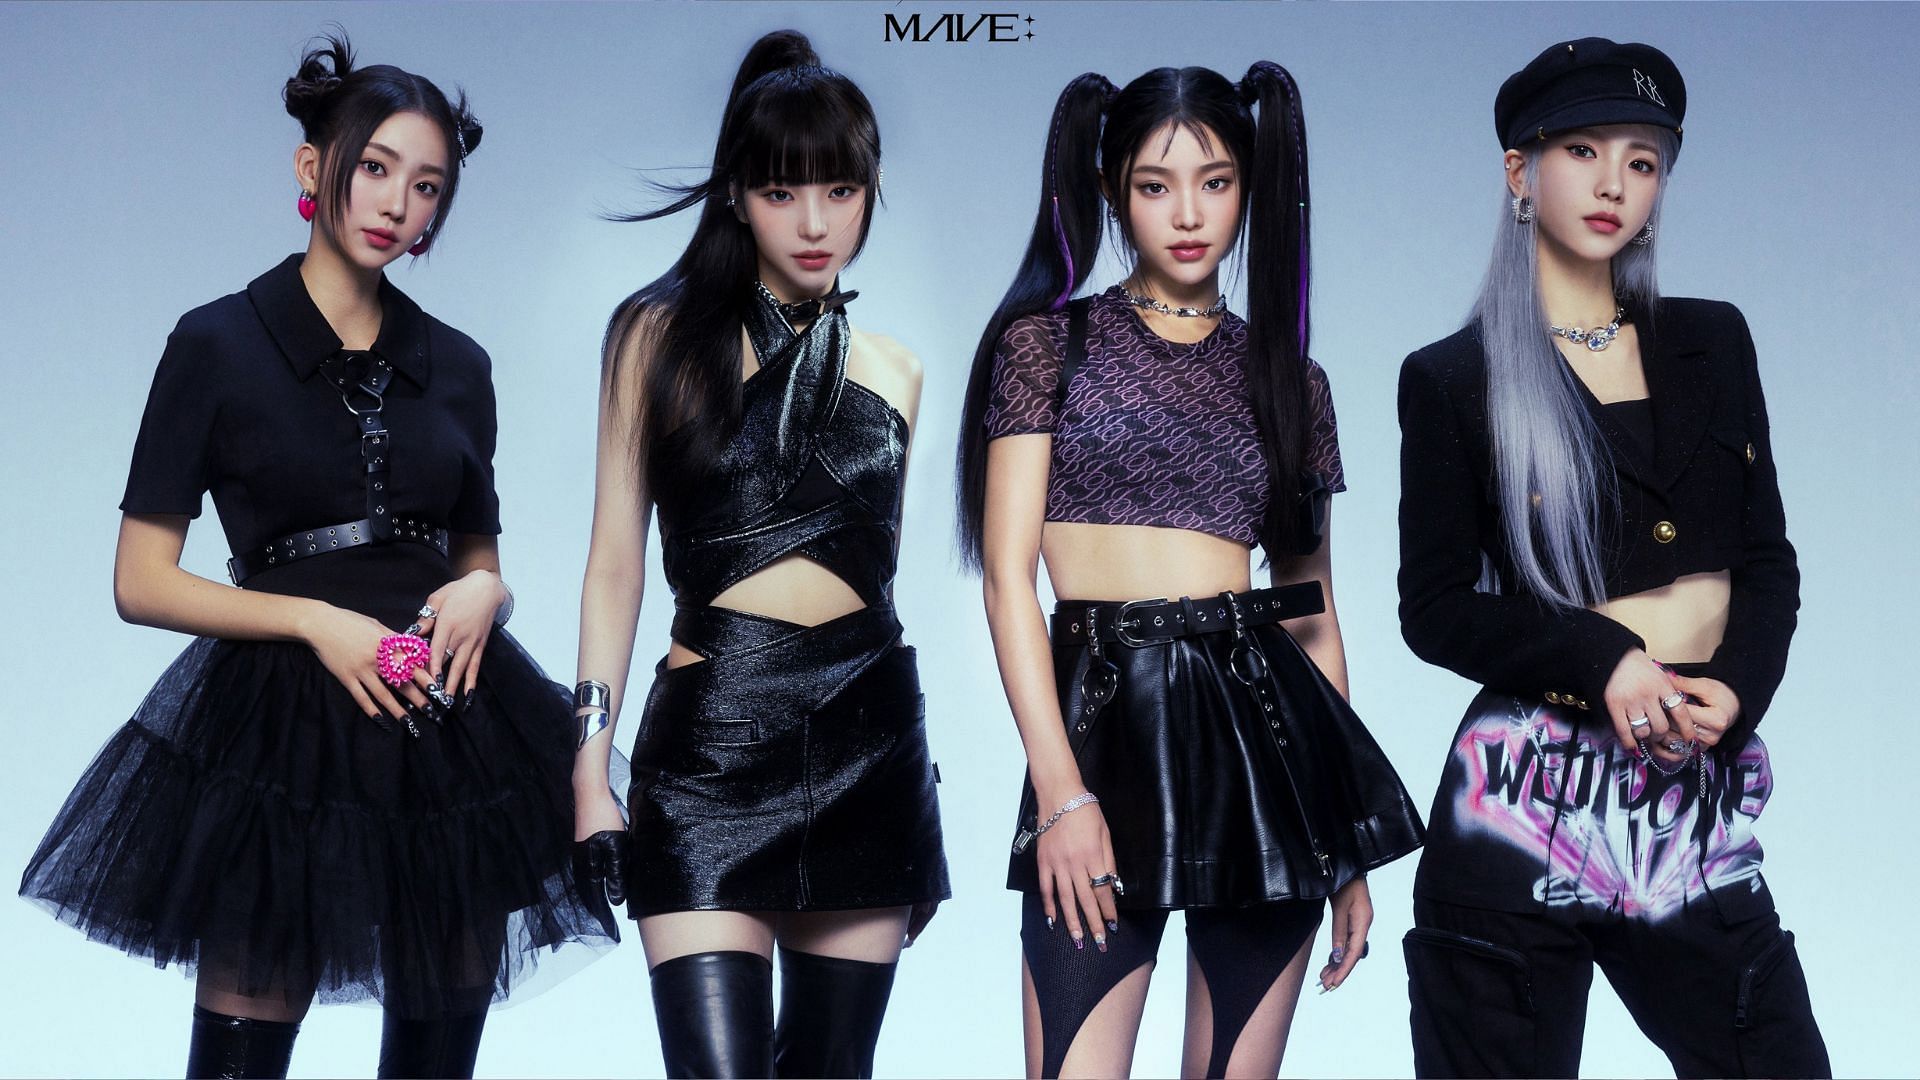 Soon-to-debut K-pop girl group MAVE receives negative response from netizens (Image via Twitter/MAVE_official_)